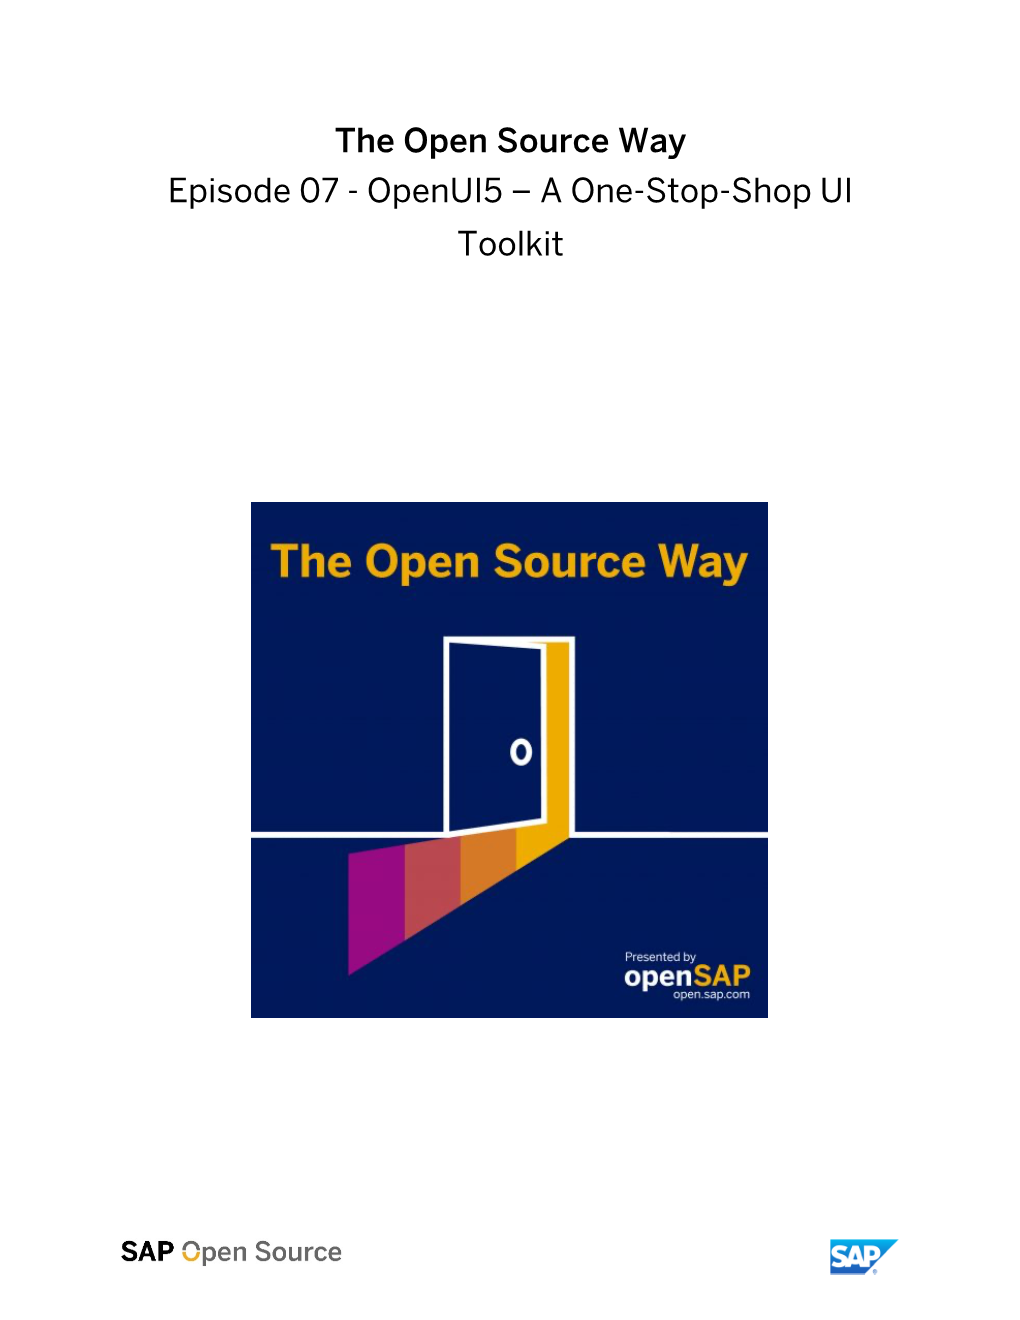 The Open Source Way Episode 07 - Openui5 – a One-Stop-Shop UI Toolkit